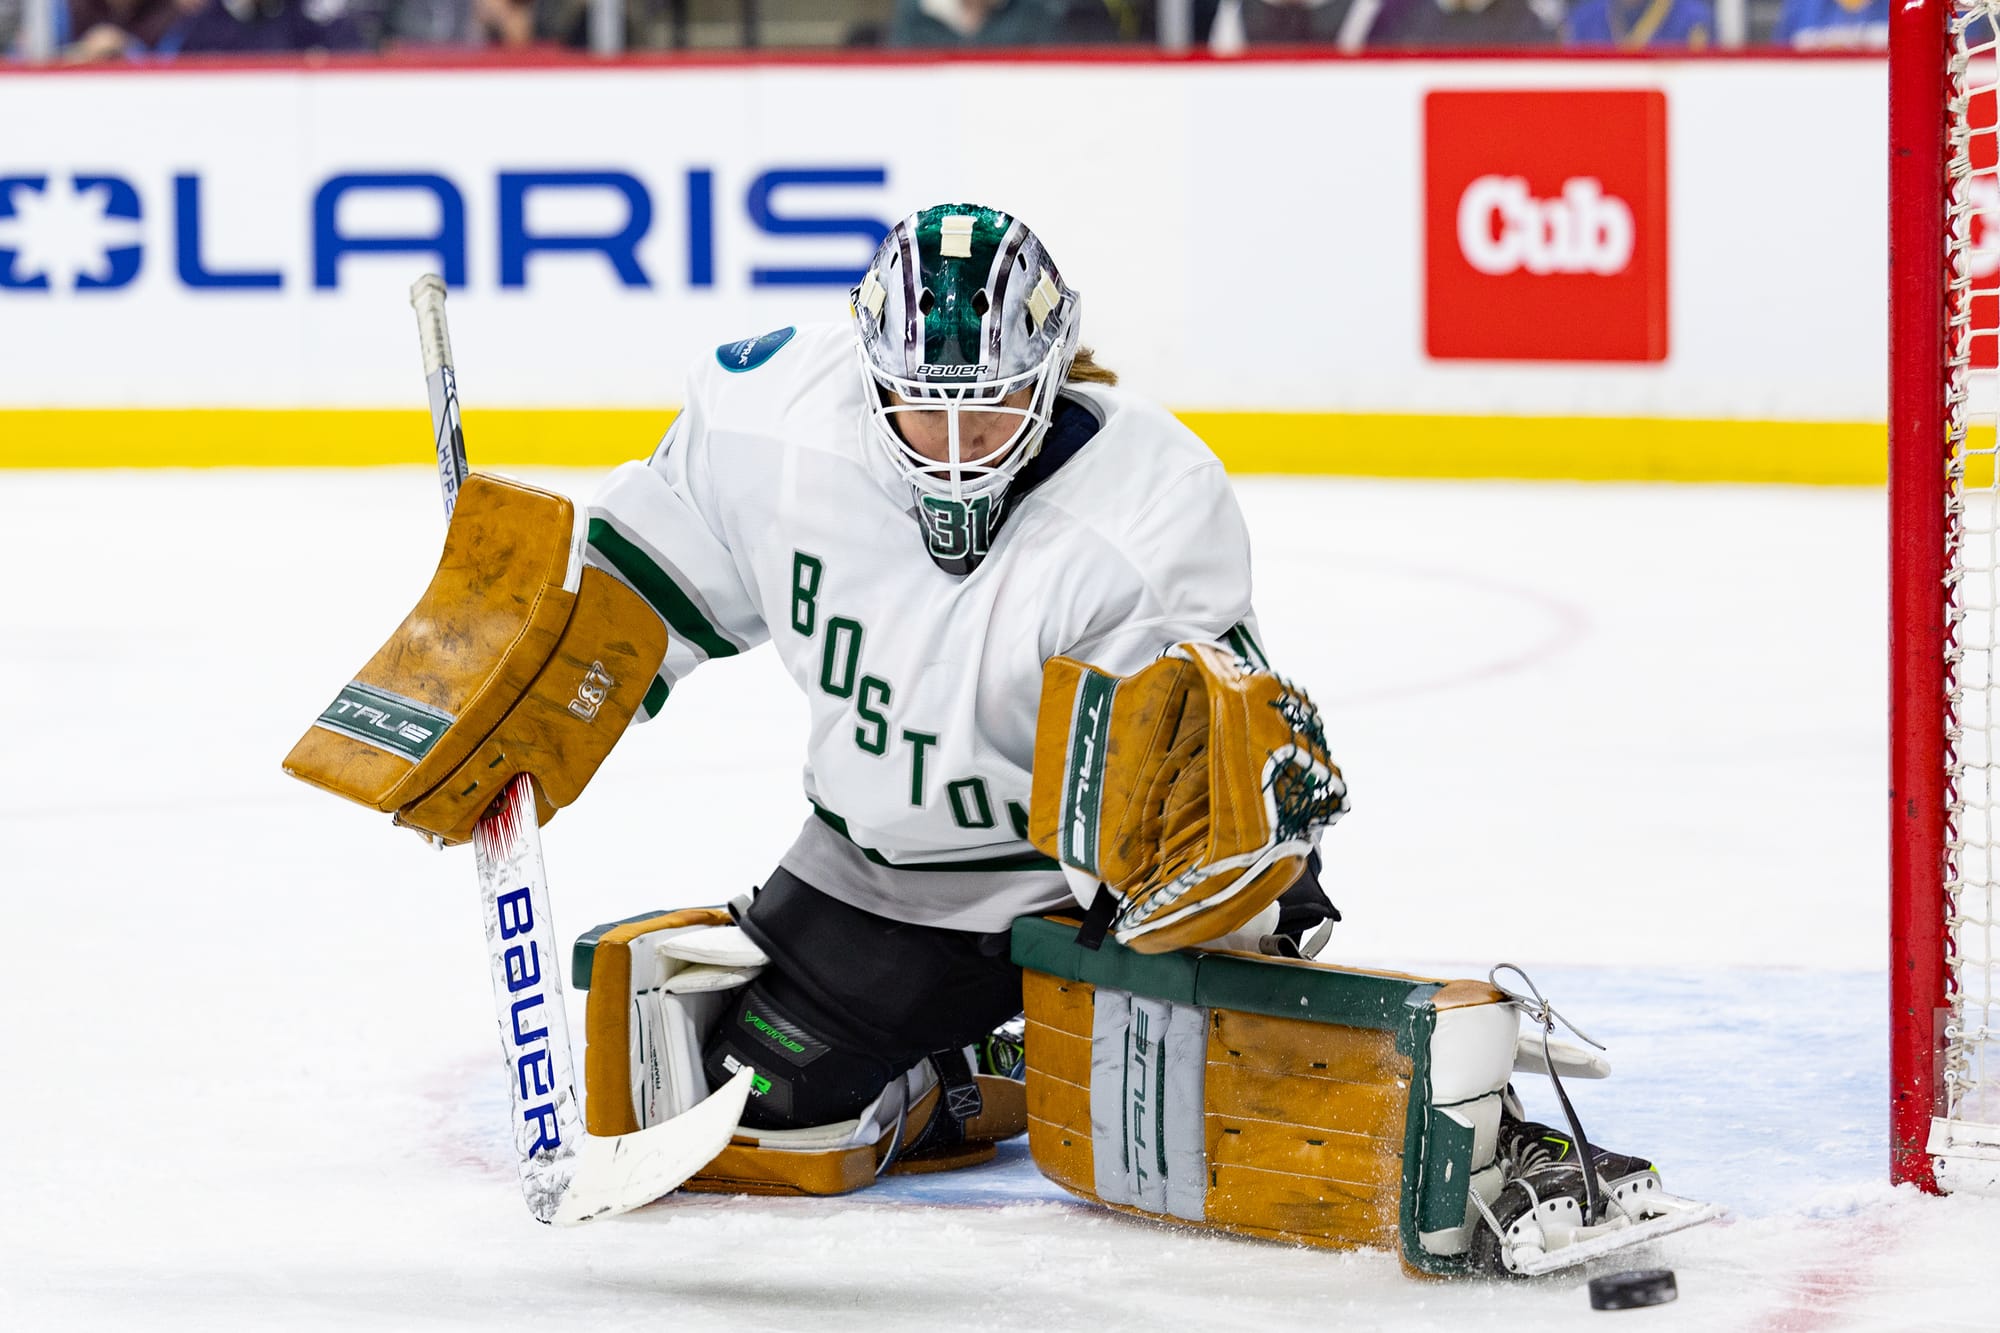 Aerin Frankel makes a save against Minnesota. She is on her knee and kicking the puck out to her left. She is in her brown pads, green and white mask, and white away uniform.